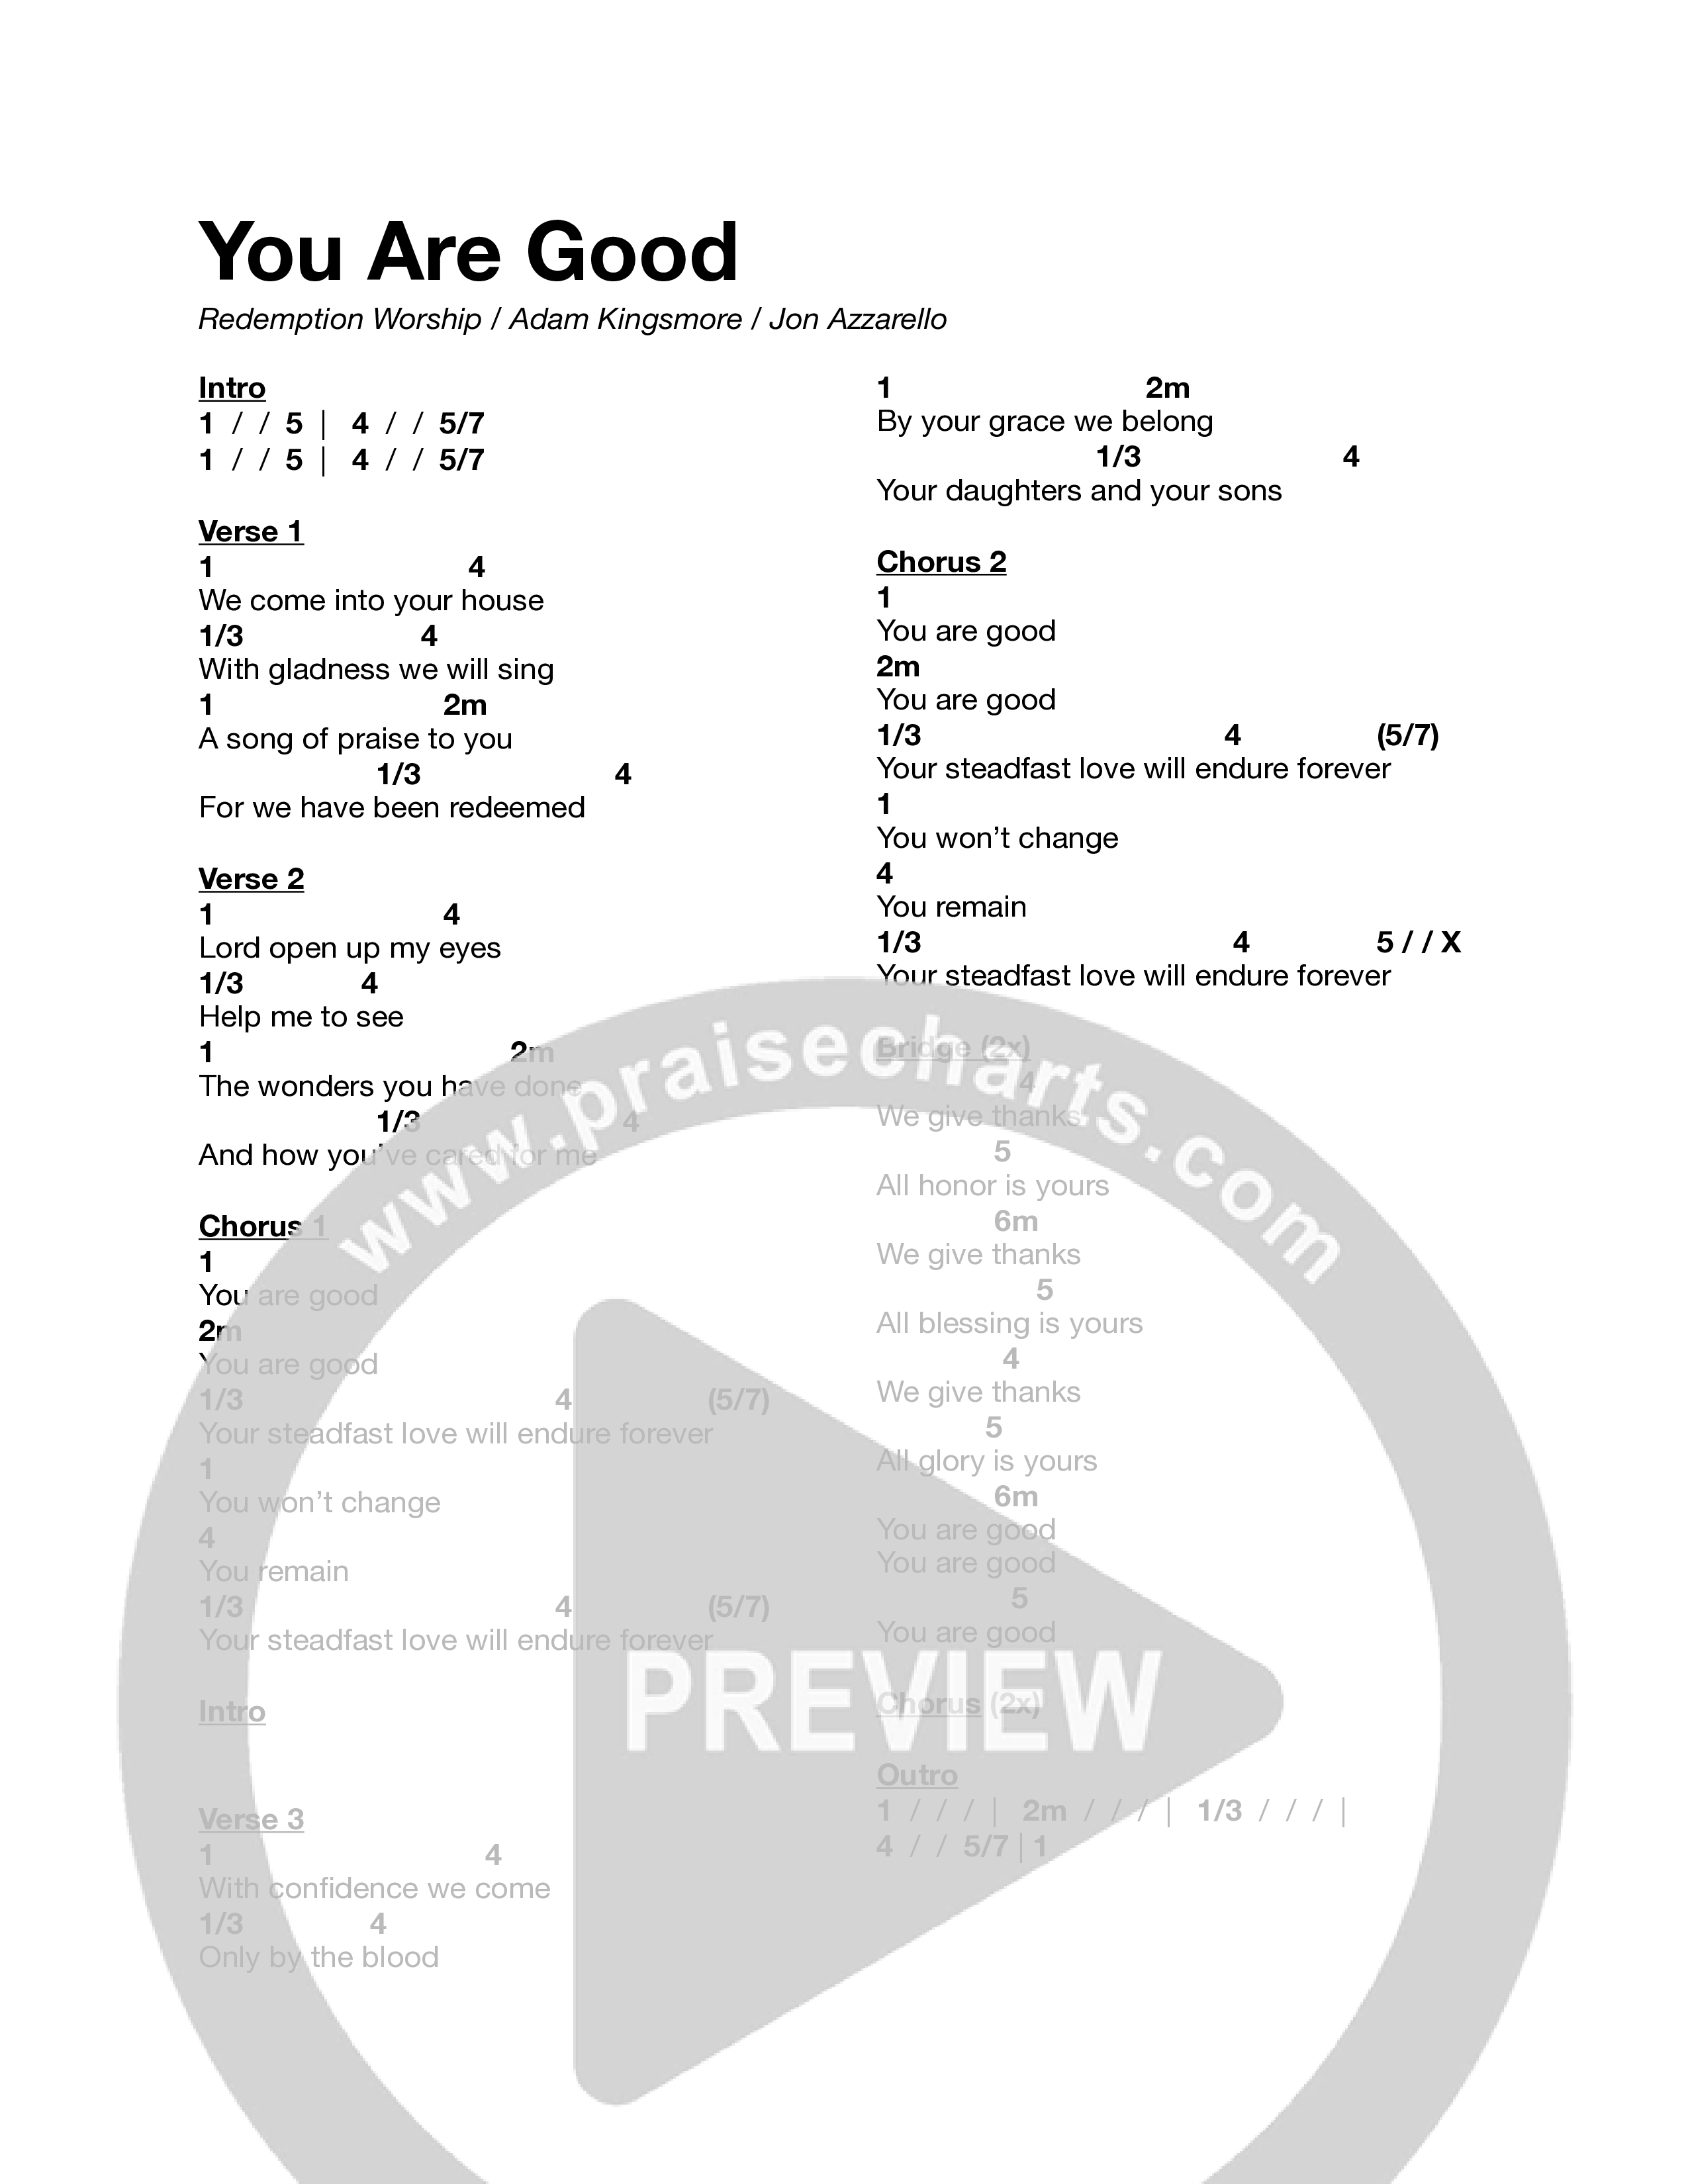 You Are Good Chord Chart (Redemption Worship)